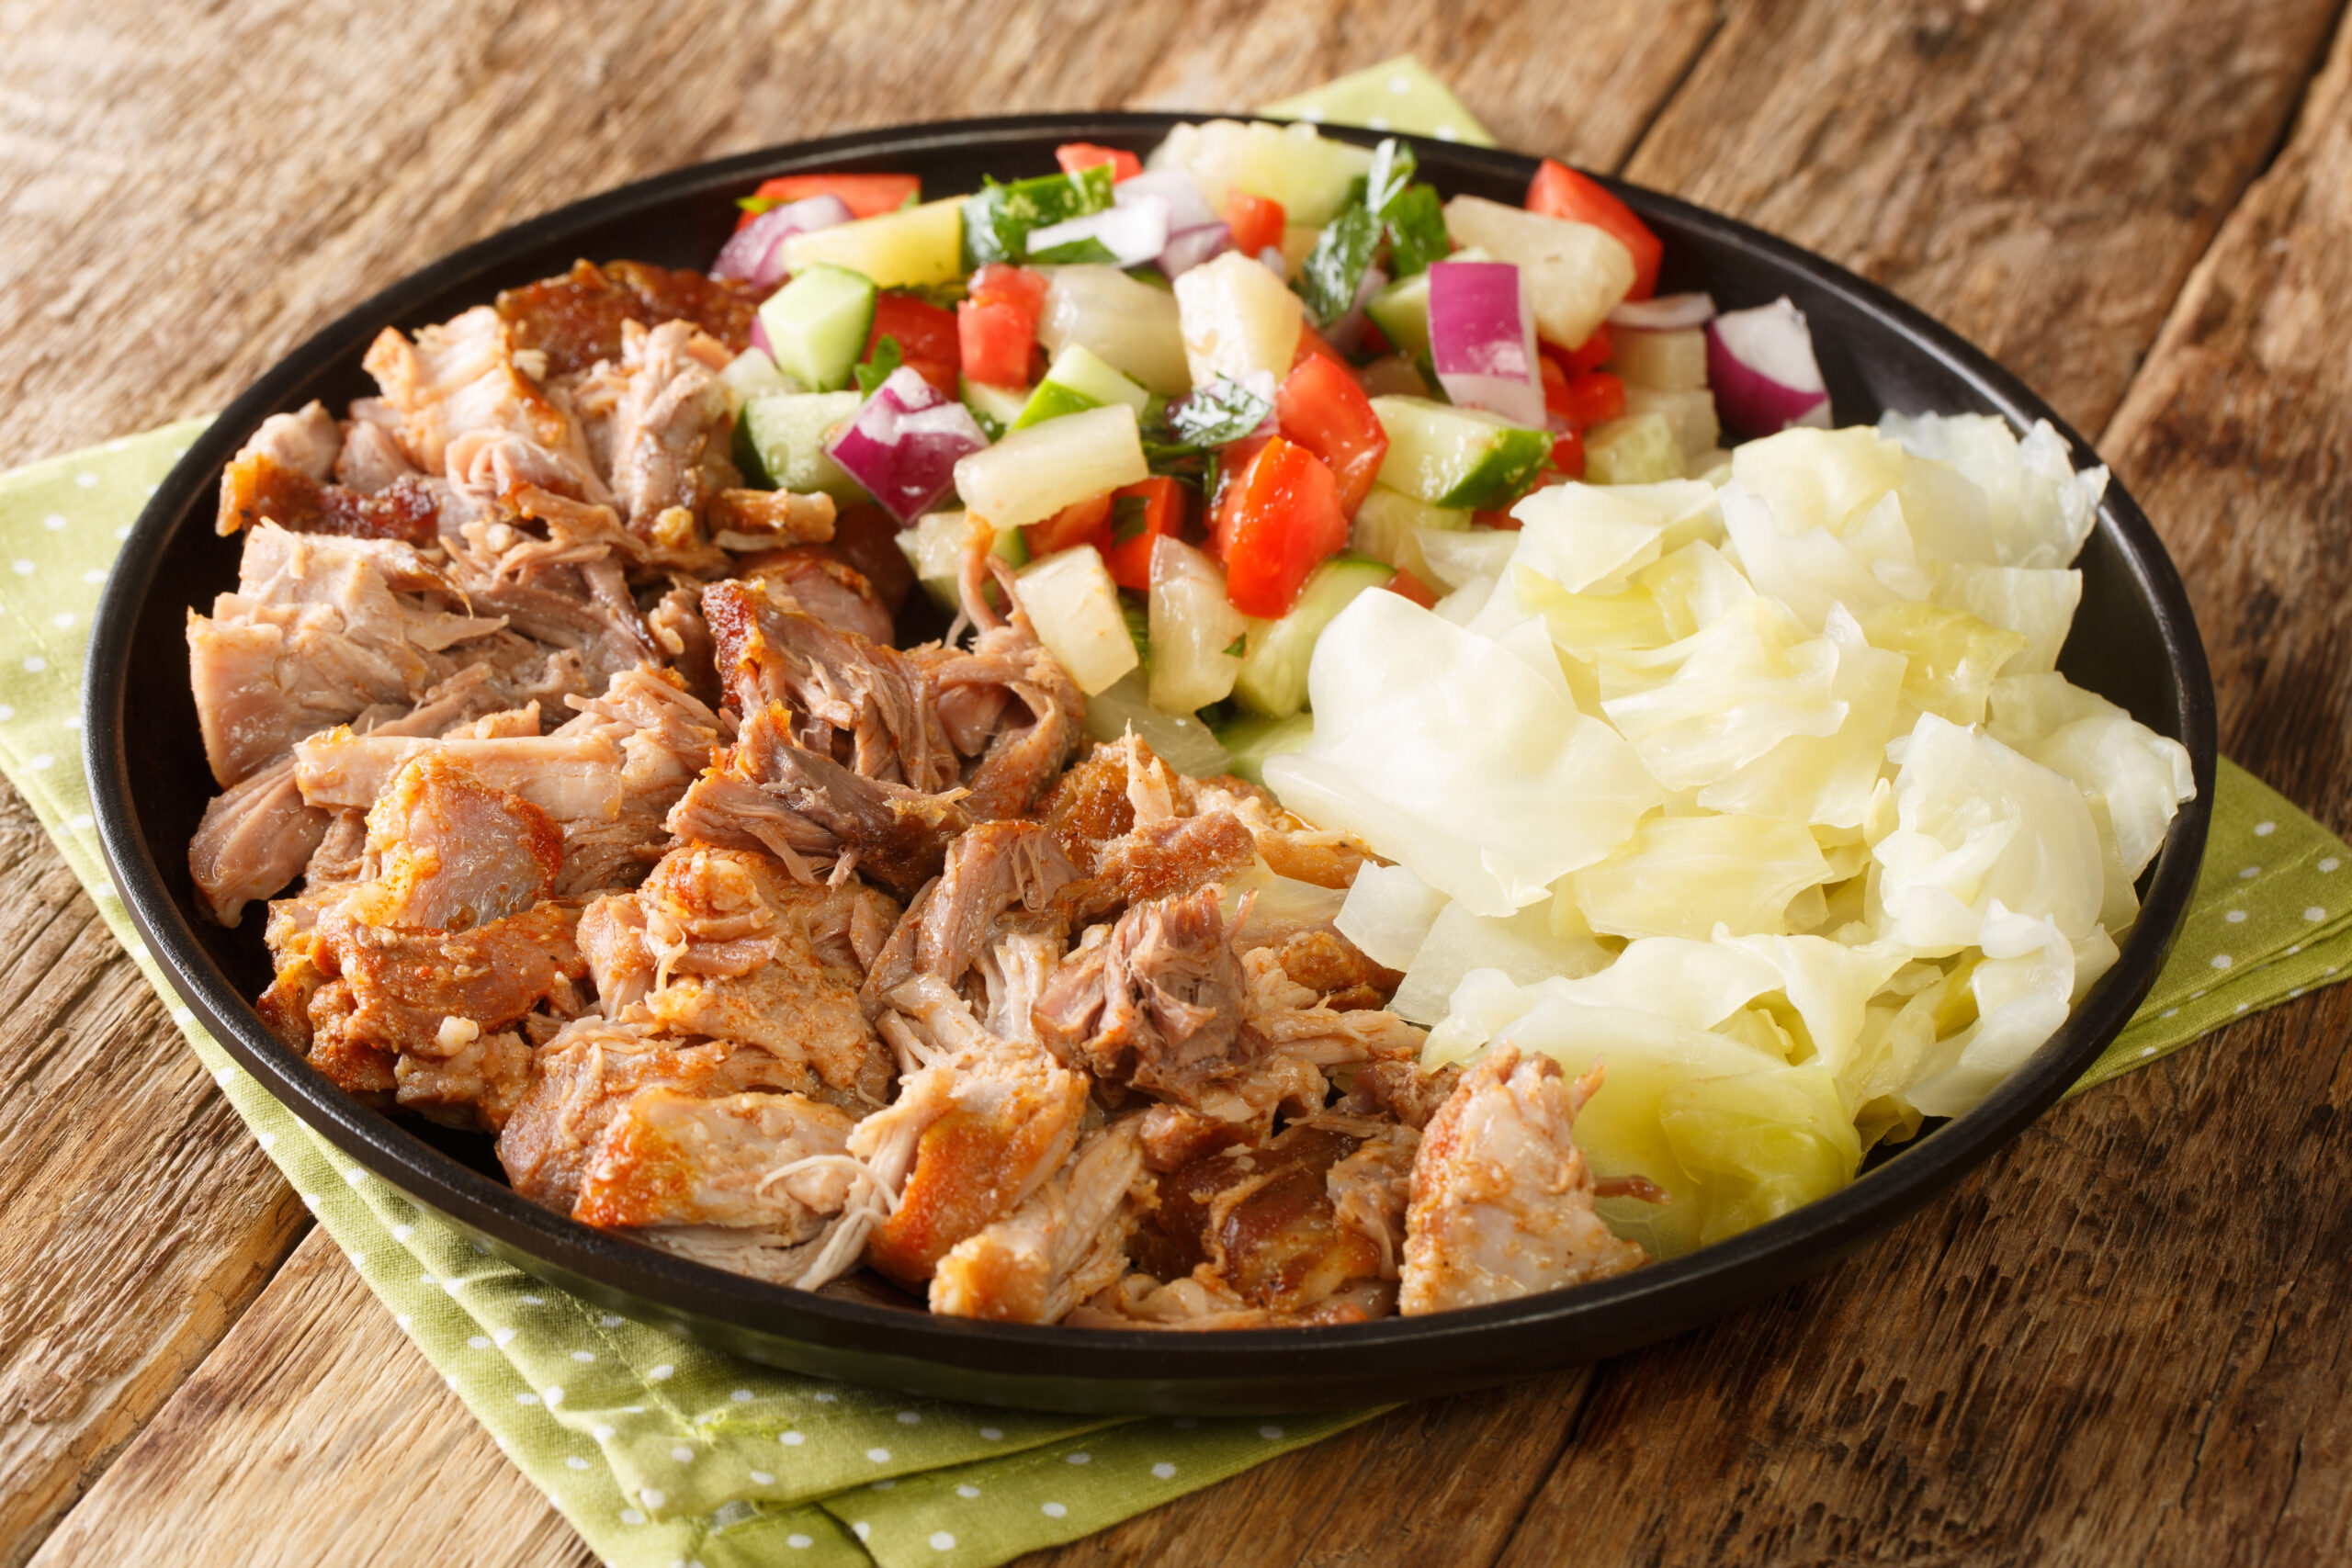 Plate of Kalua pork and vegetables